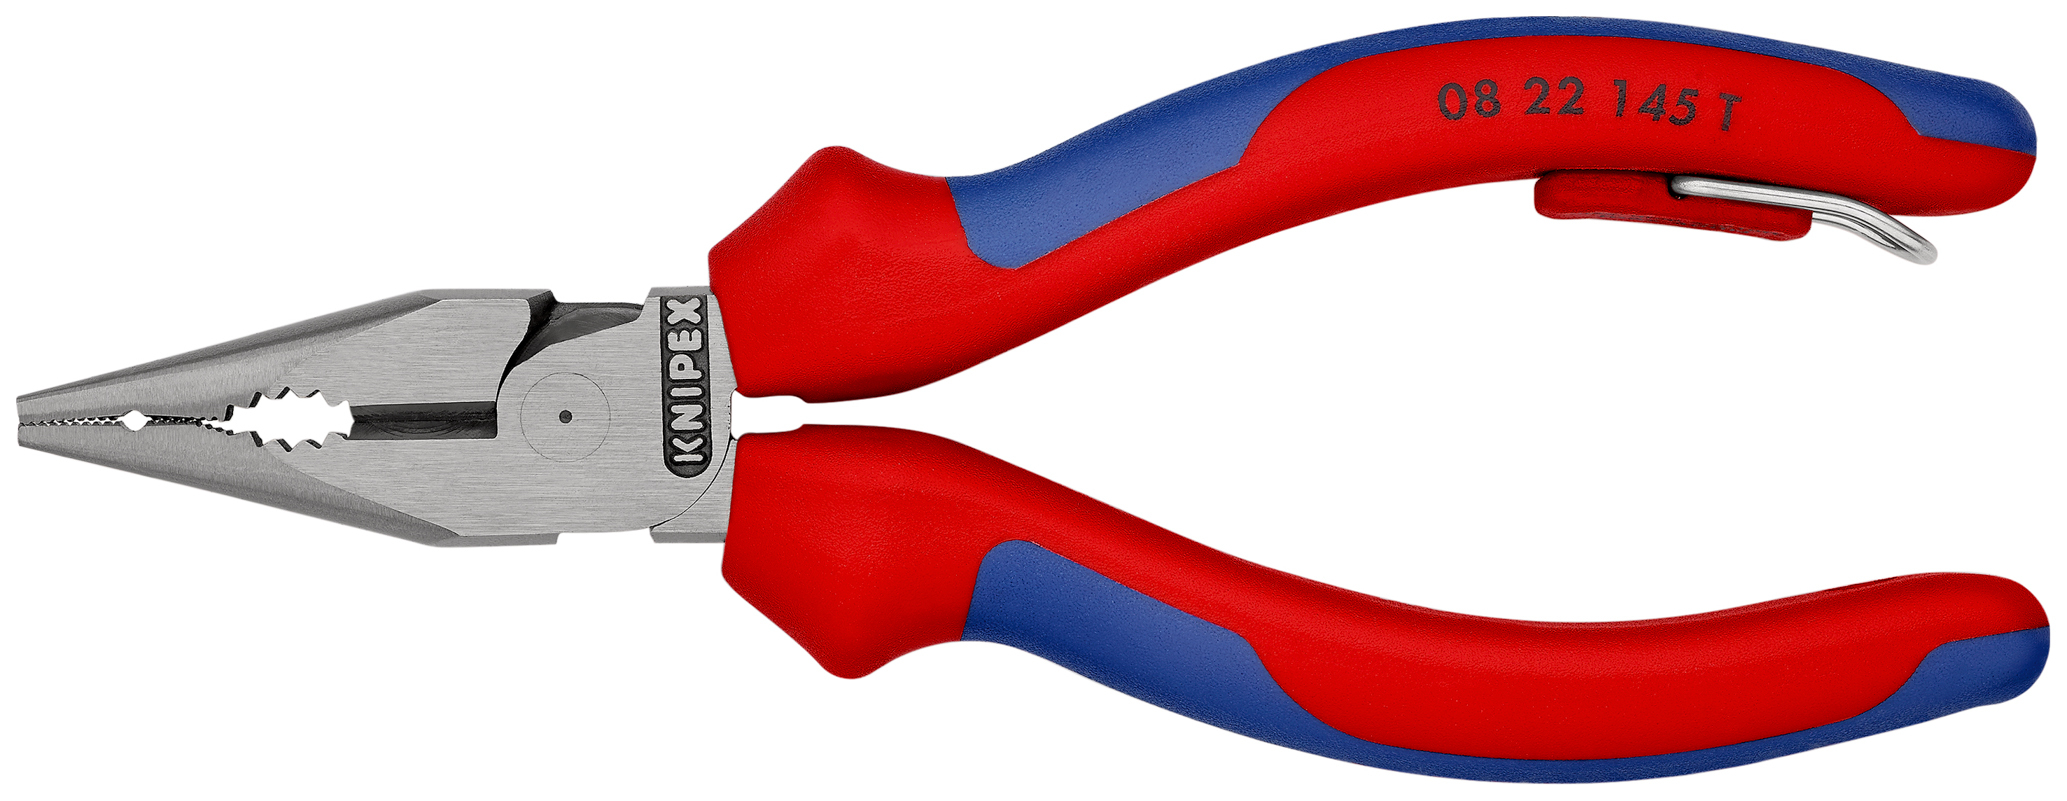 Pince univers. 1/2 ronde 145mm antichute KNIPEX - 08 22 145 T BK